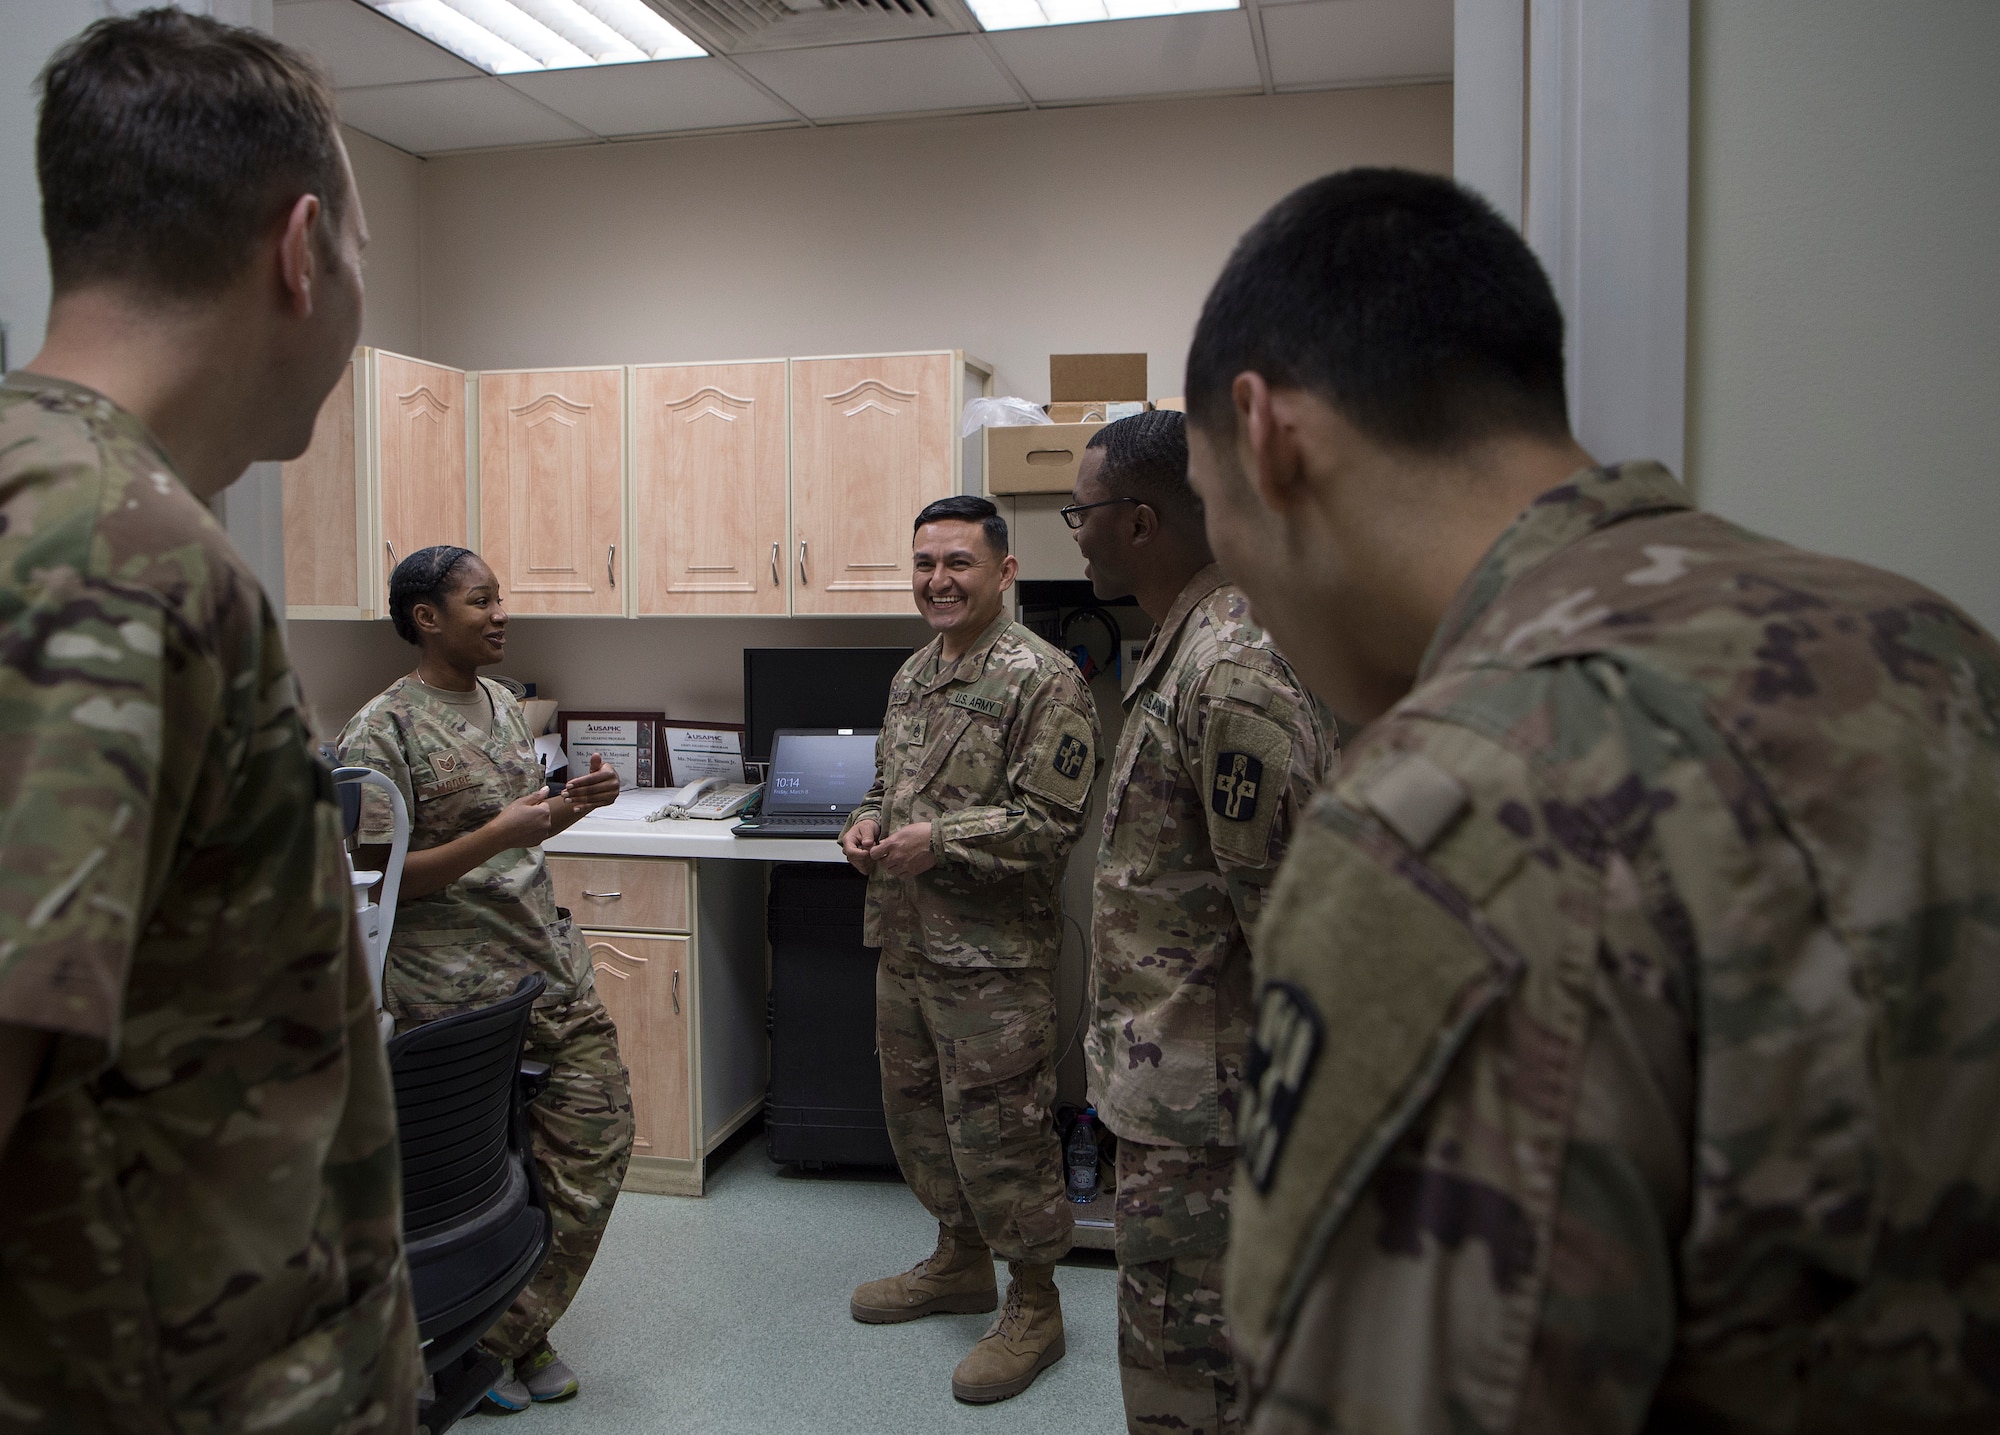 U.S. Air Force Tech. Sgt. Marquita Moore, center left, 379th Expeditionary Medical Group (EMDG) optometry NCO in charge and U.S. Air Force Lt. Col. Peter Carra, left, 379th EMDG optometry officer in charge from Al Udeid Air Base (AUAB), Qatar, talk with U.S. Army optical laboratory specialists of Area Support Group - Qatar (ASG-QA) from Camp As Sayliyah (CAS), Qatar, prior to a patient appointment March 9, 2019, at CAS. Moore and Carra travel to CAS once a week to provide eye care for Soldiers who, in turn, fabricate glasses prescribed for Airmen at AUAB and servicemembers at other deployed locations throughout U.S. Central Command.  (U.S. Air Force photo by Tech. Sgt. Christopher Hubenthal)